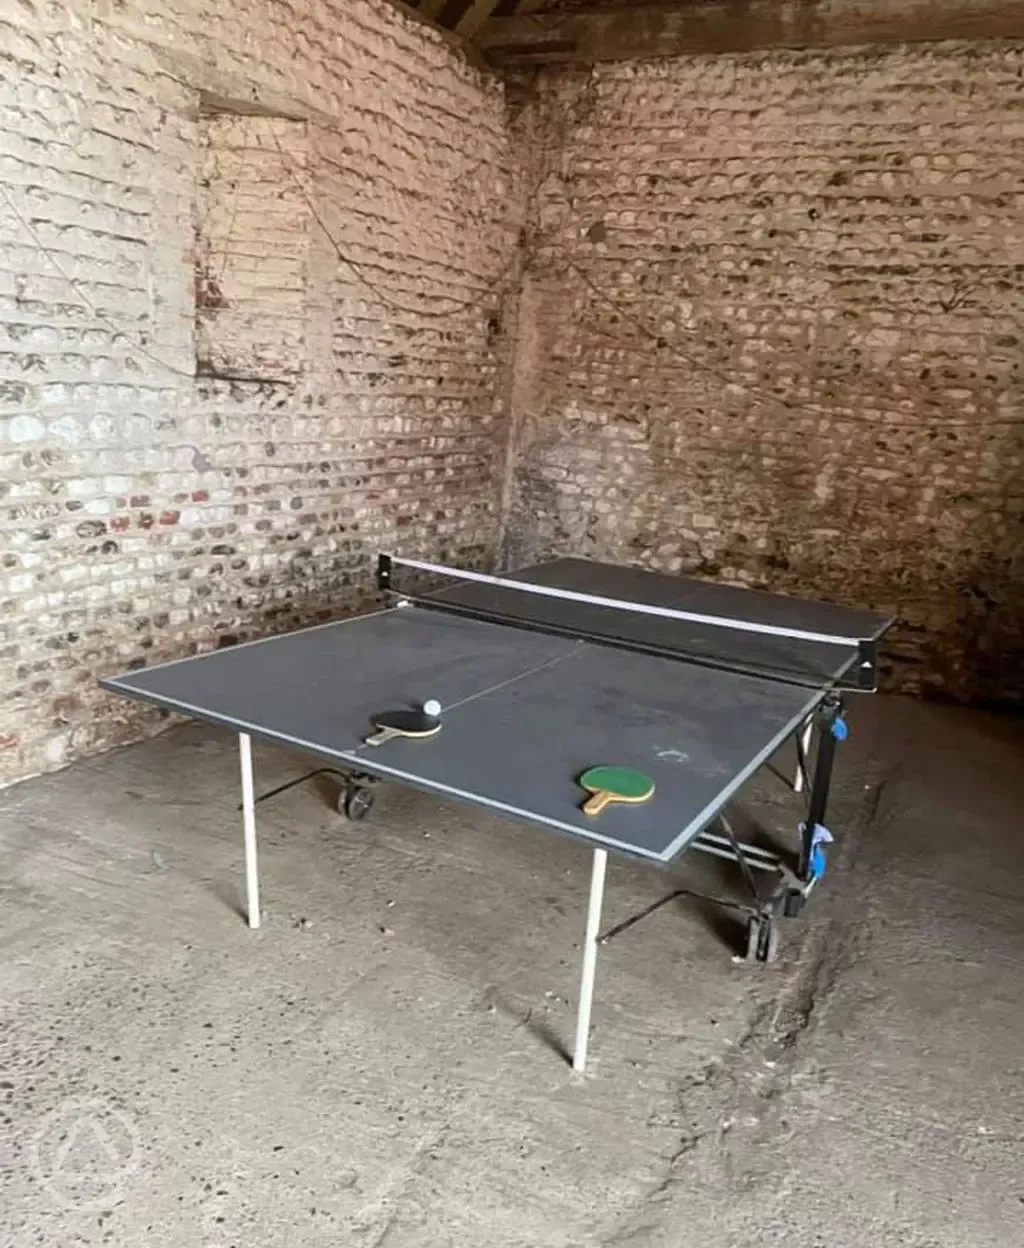 Table tennis in the games room 